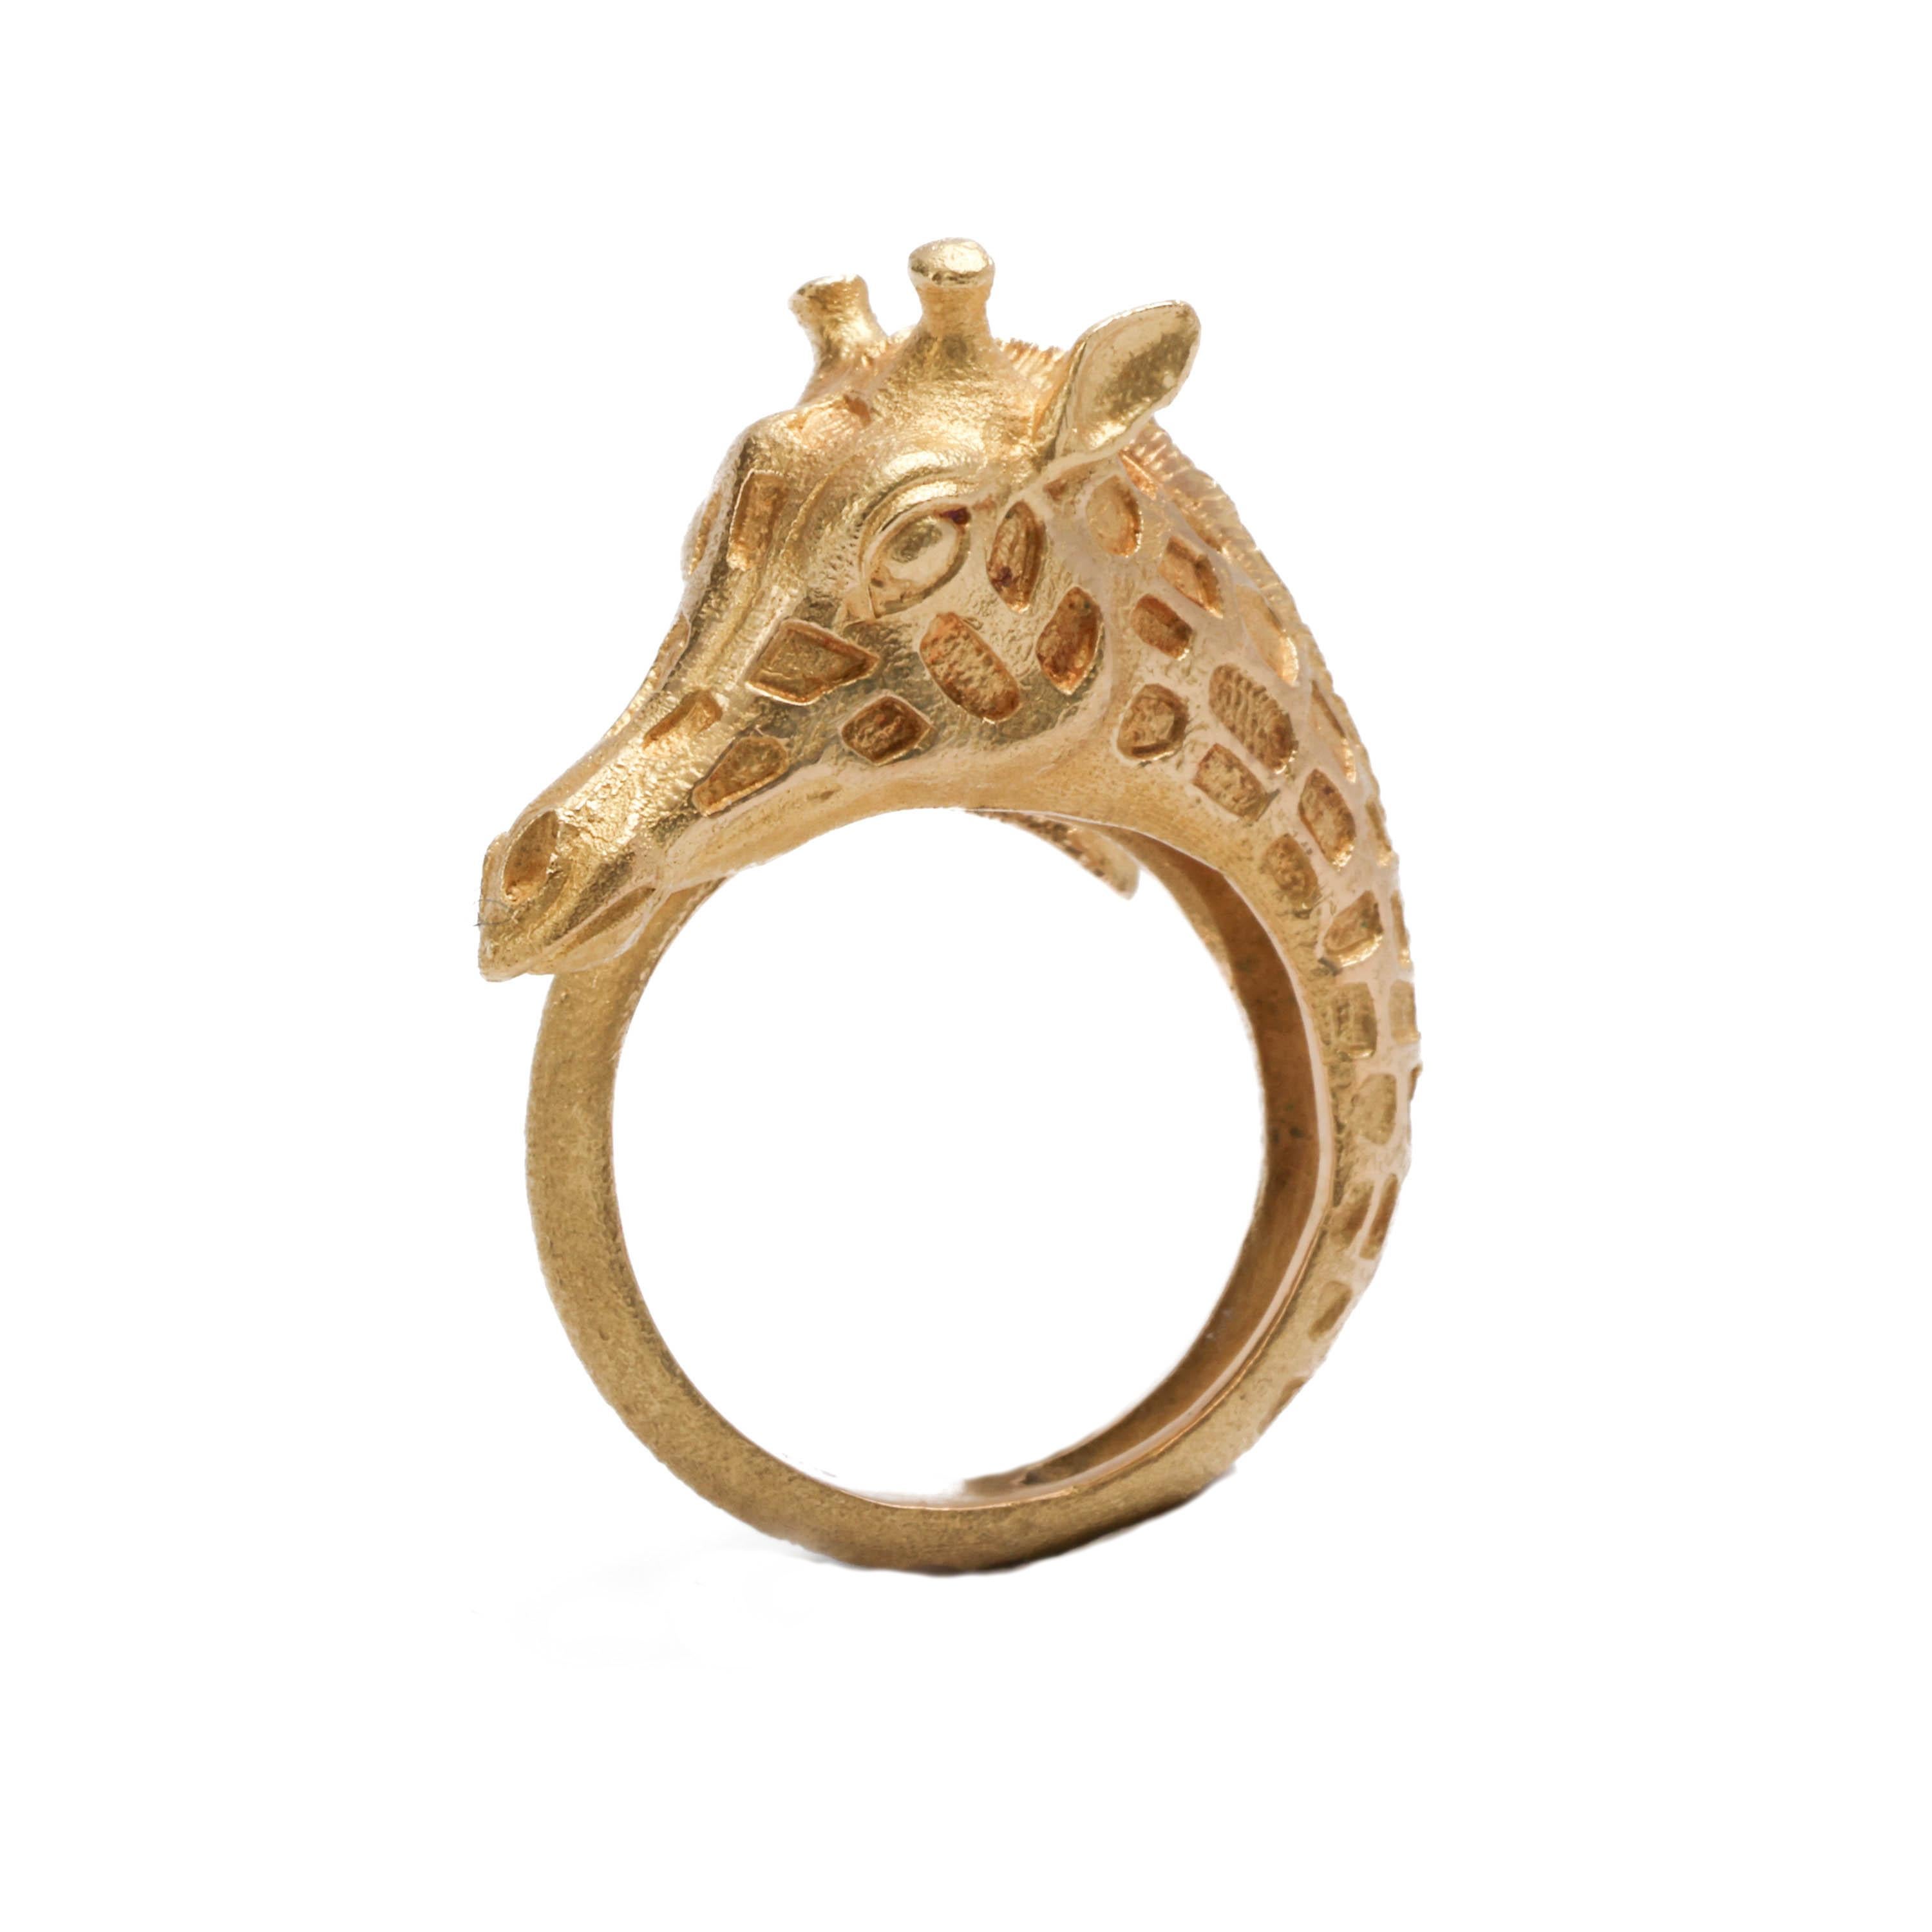 This giraffe ring is fully hallmarked with Swiss gold assay marks along with the Patek Phillippe maker's mark and was most likely created by Gilbert Albert. The ring is reflective of the work Albert was doing in watchcase and jewelry designs during